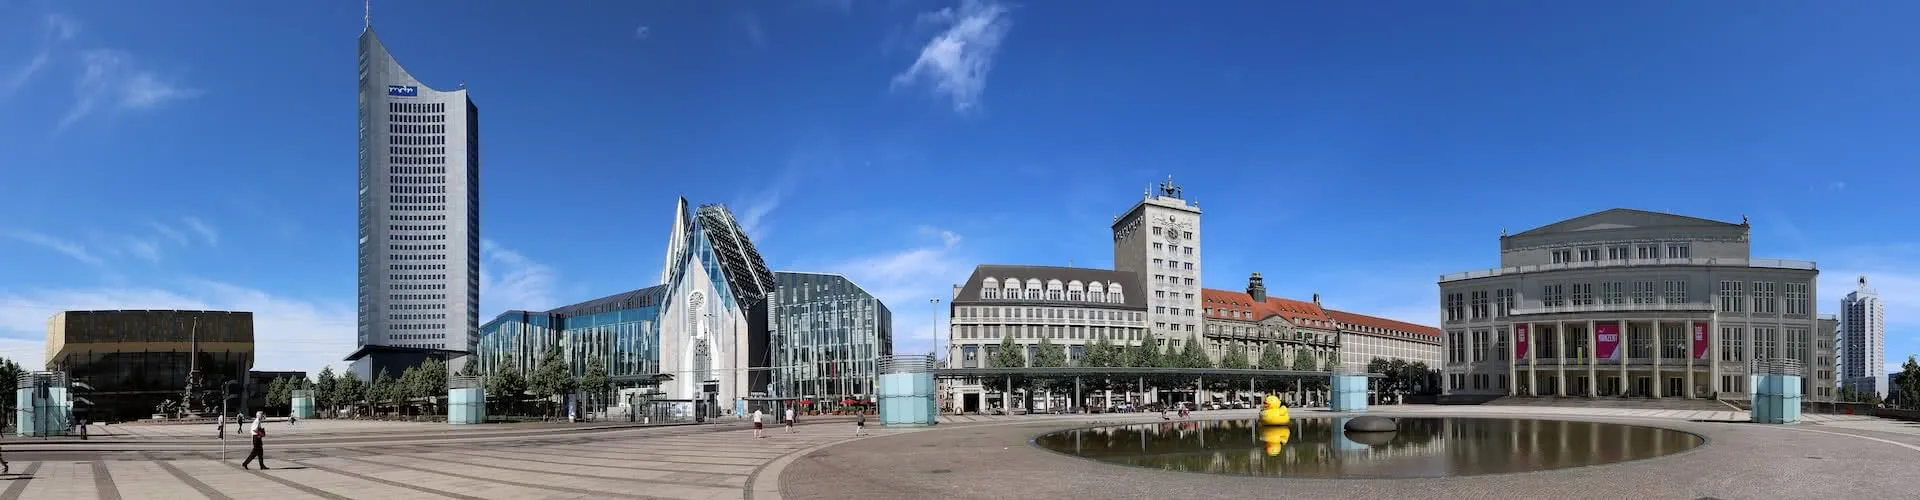 Leipzig - the destination with youth hostels